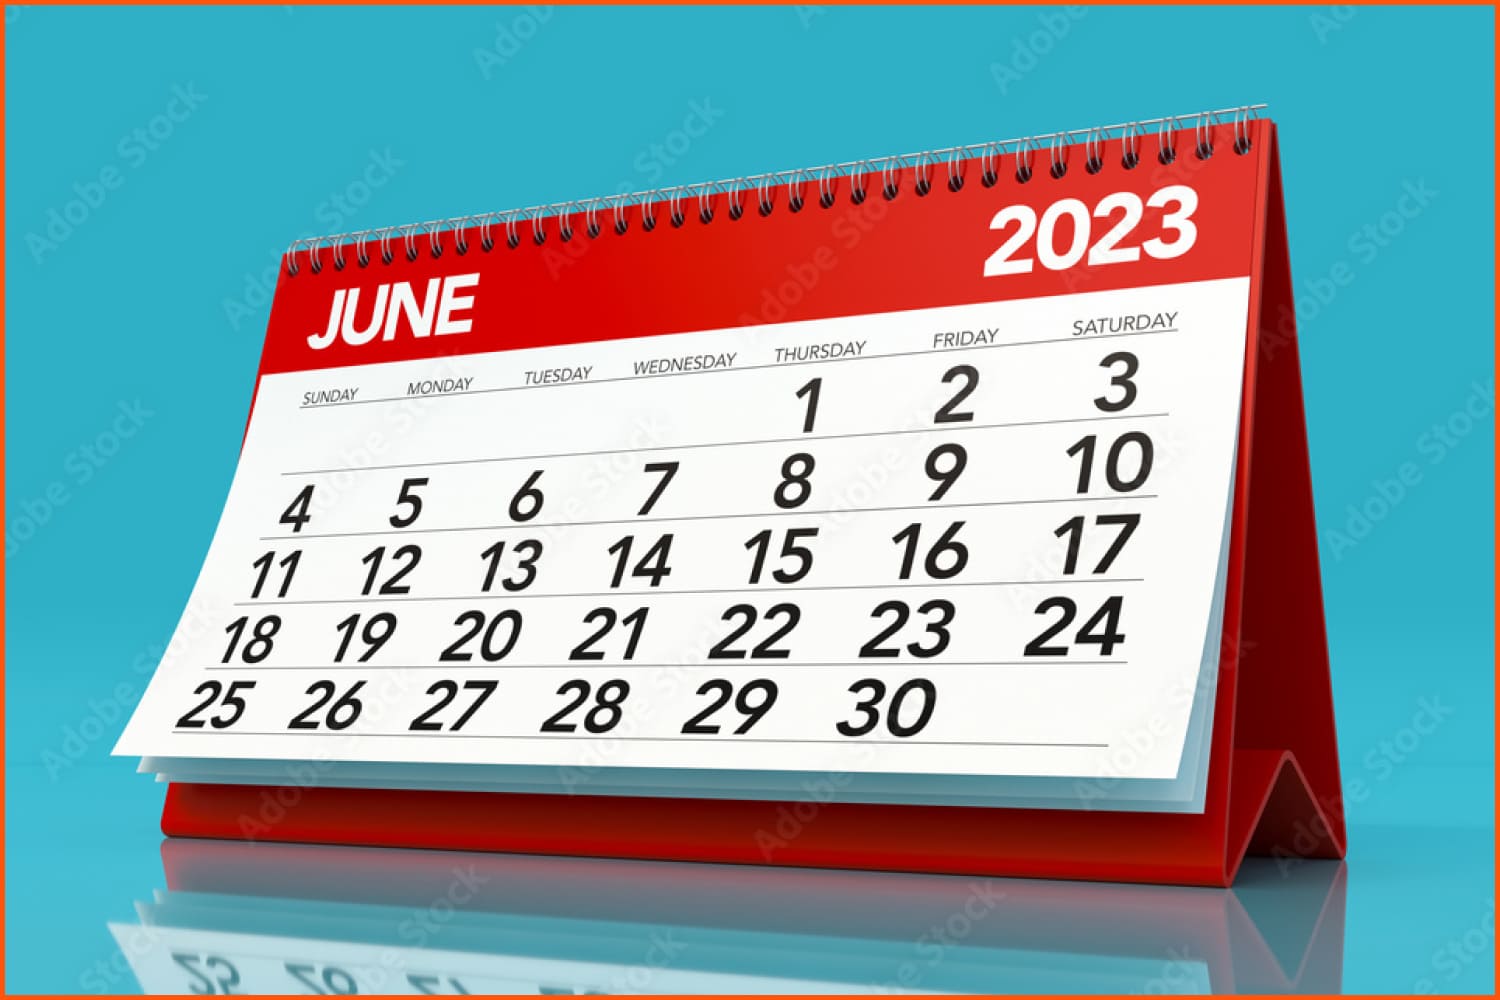 Desk calendar for June with a red base on a blue background.